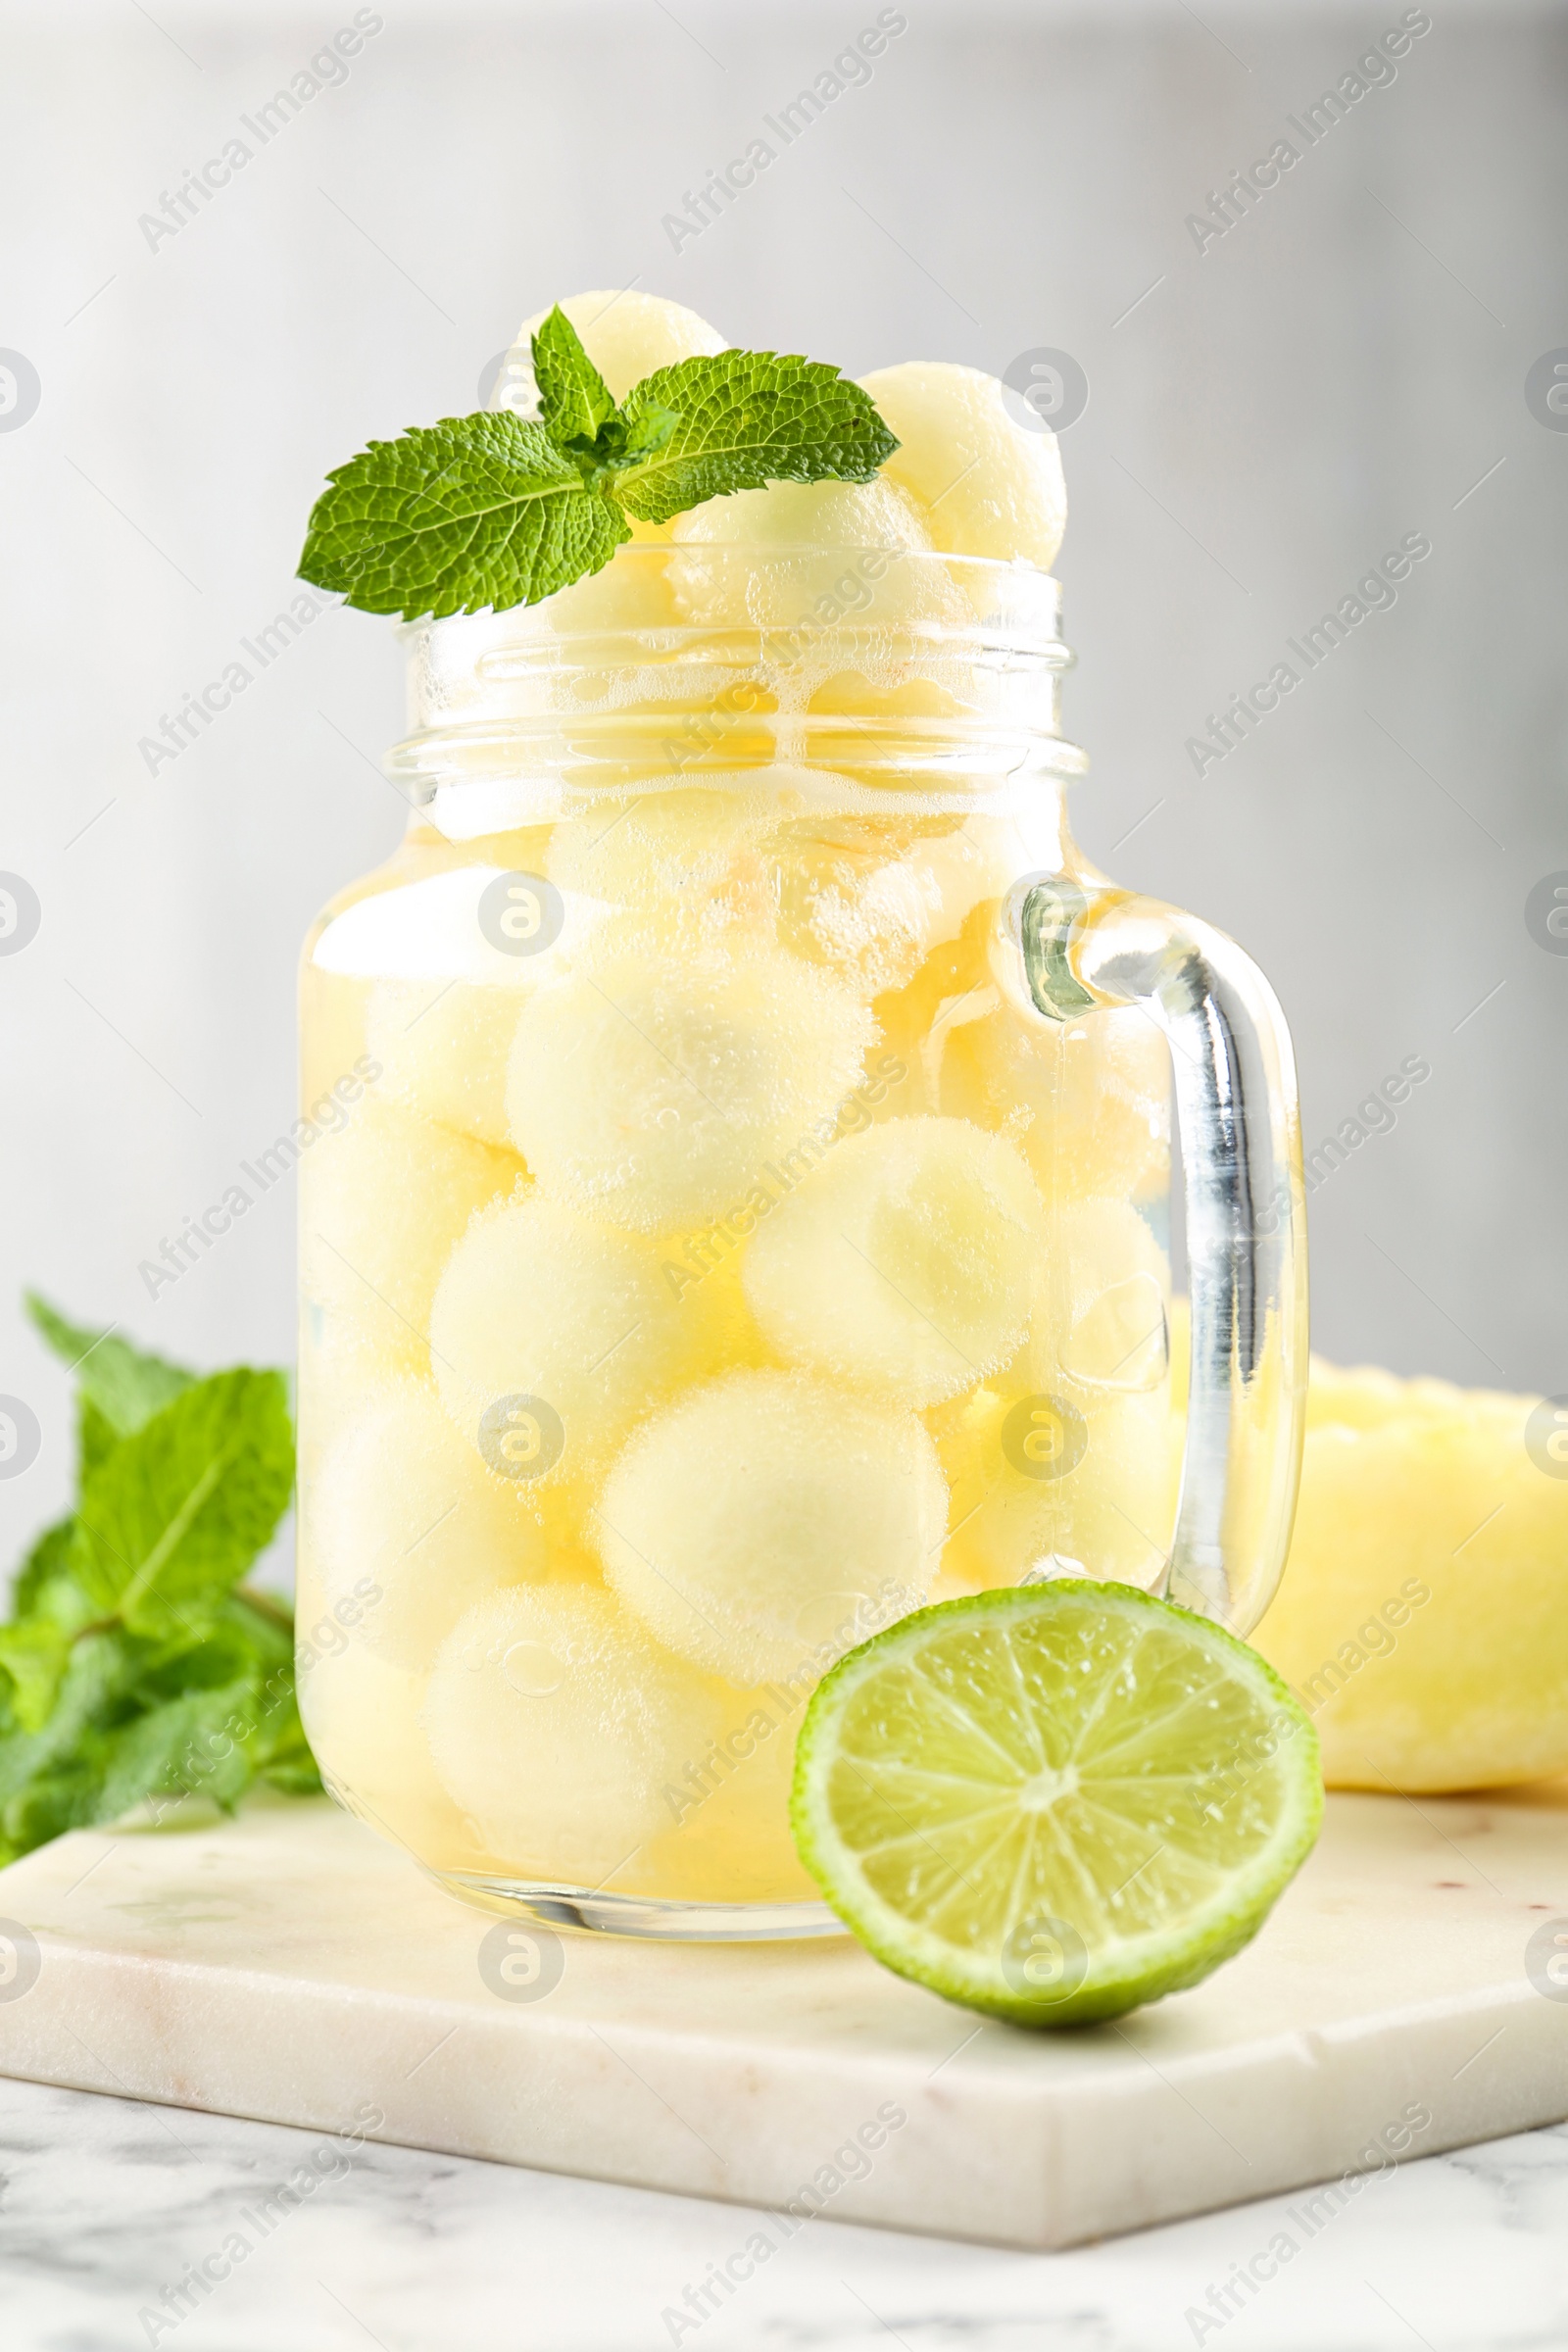 Photo of Mason jar of melon ball cocktail served with mint and lime on white marble table